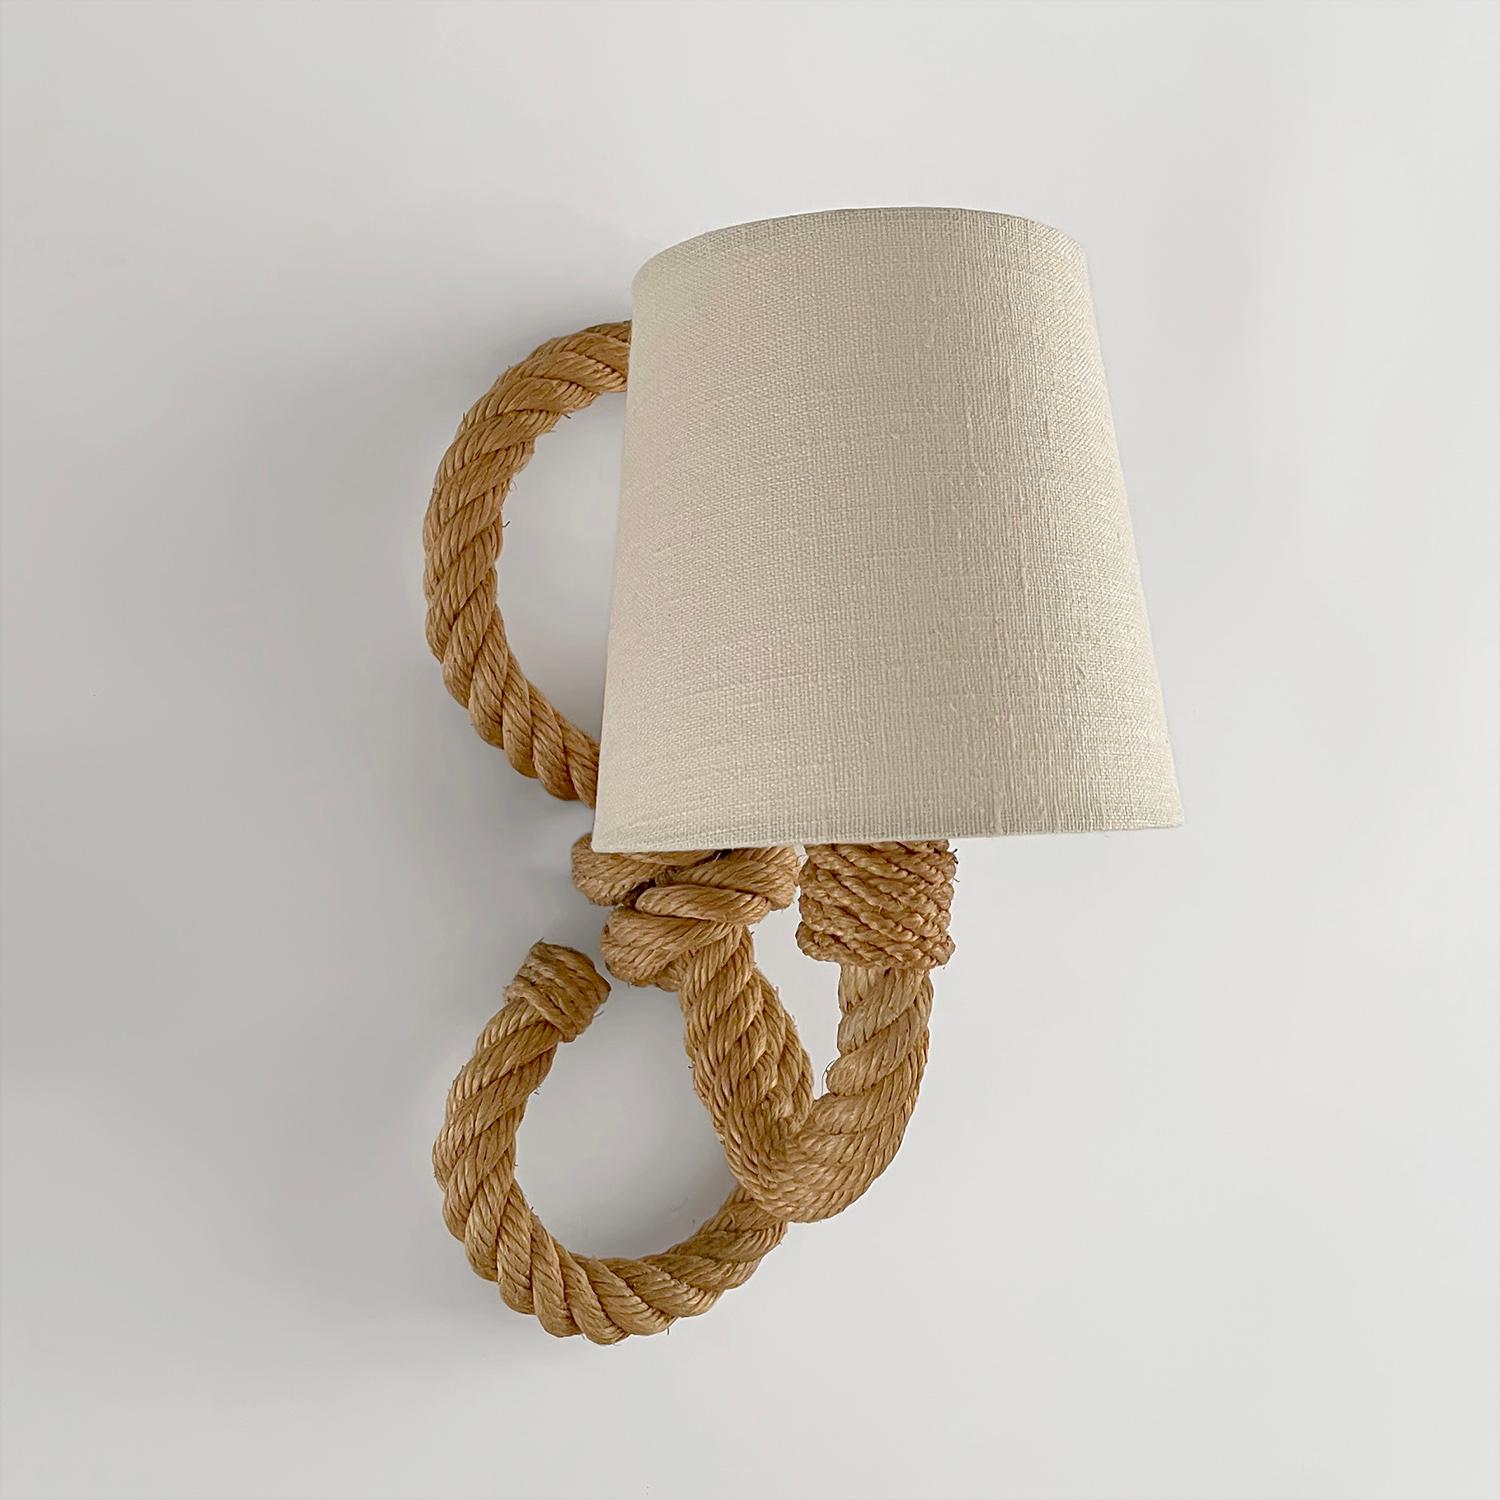 Adrien Audoux & Frida Minet rope sconce
France, circa 1950s
Thick sculpted rope loop frame supports an extending arm of light
Natural color variations throughout
New linen shade 
Newly rewired 
Single socket candelabra base 
Patina from age and use